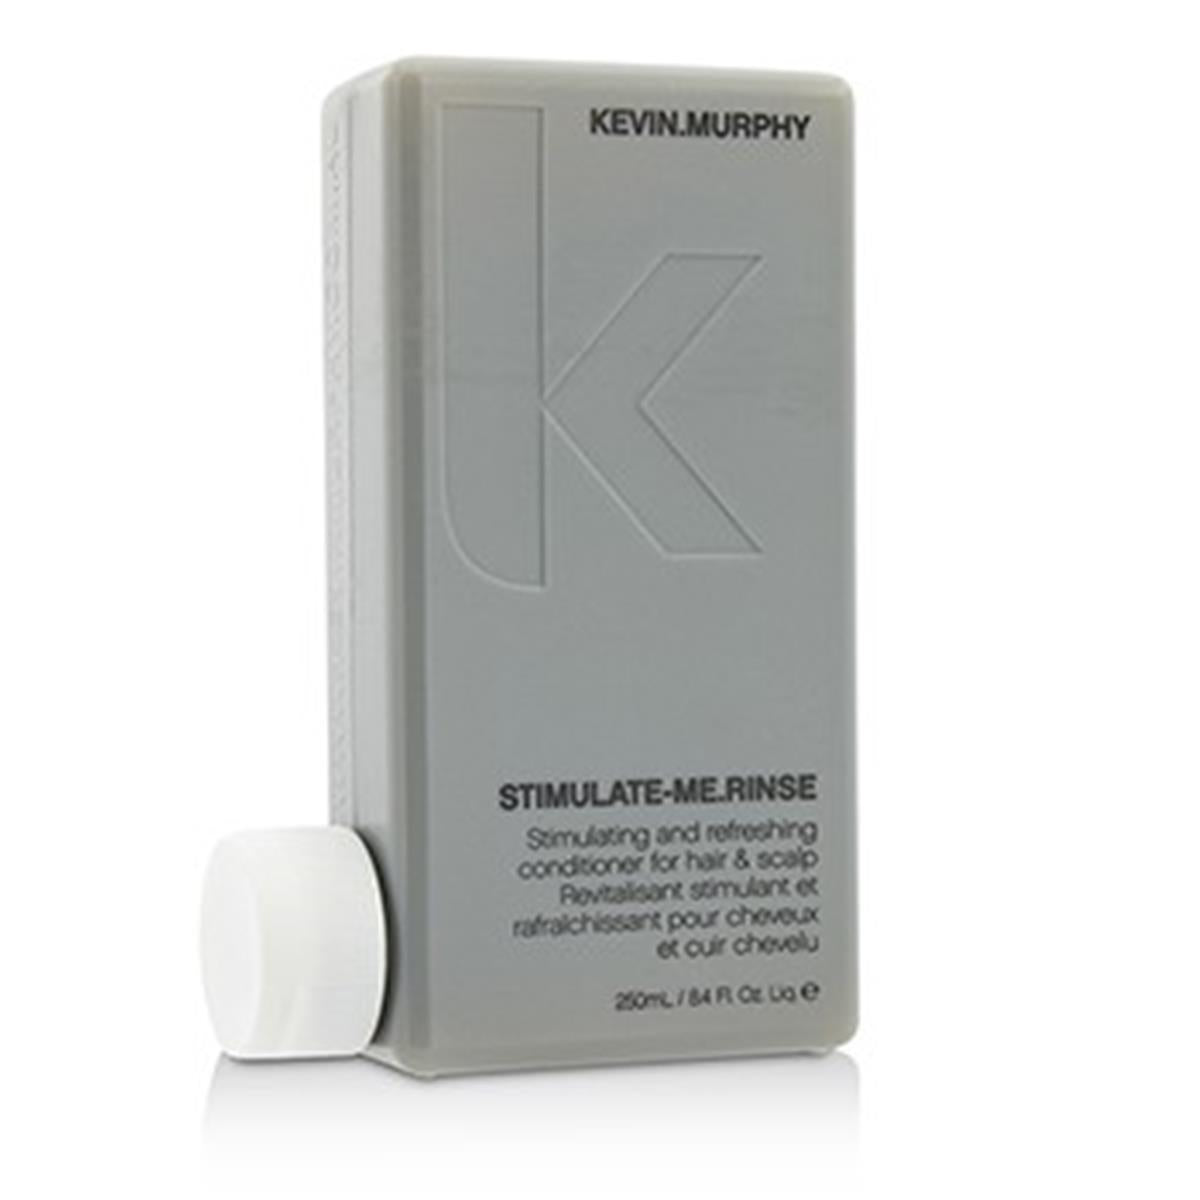 Kevin Murphy Kevin. Murphy 200131 Stimulate-Me Rinse Stimulating & Refreshing Conditioner for Hair & Scalp, 250 ml-8.4 oz One Size